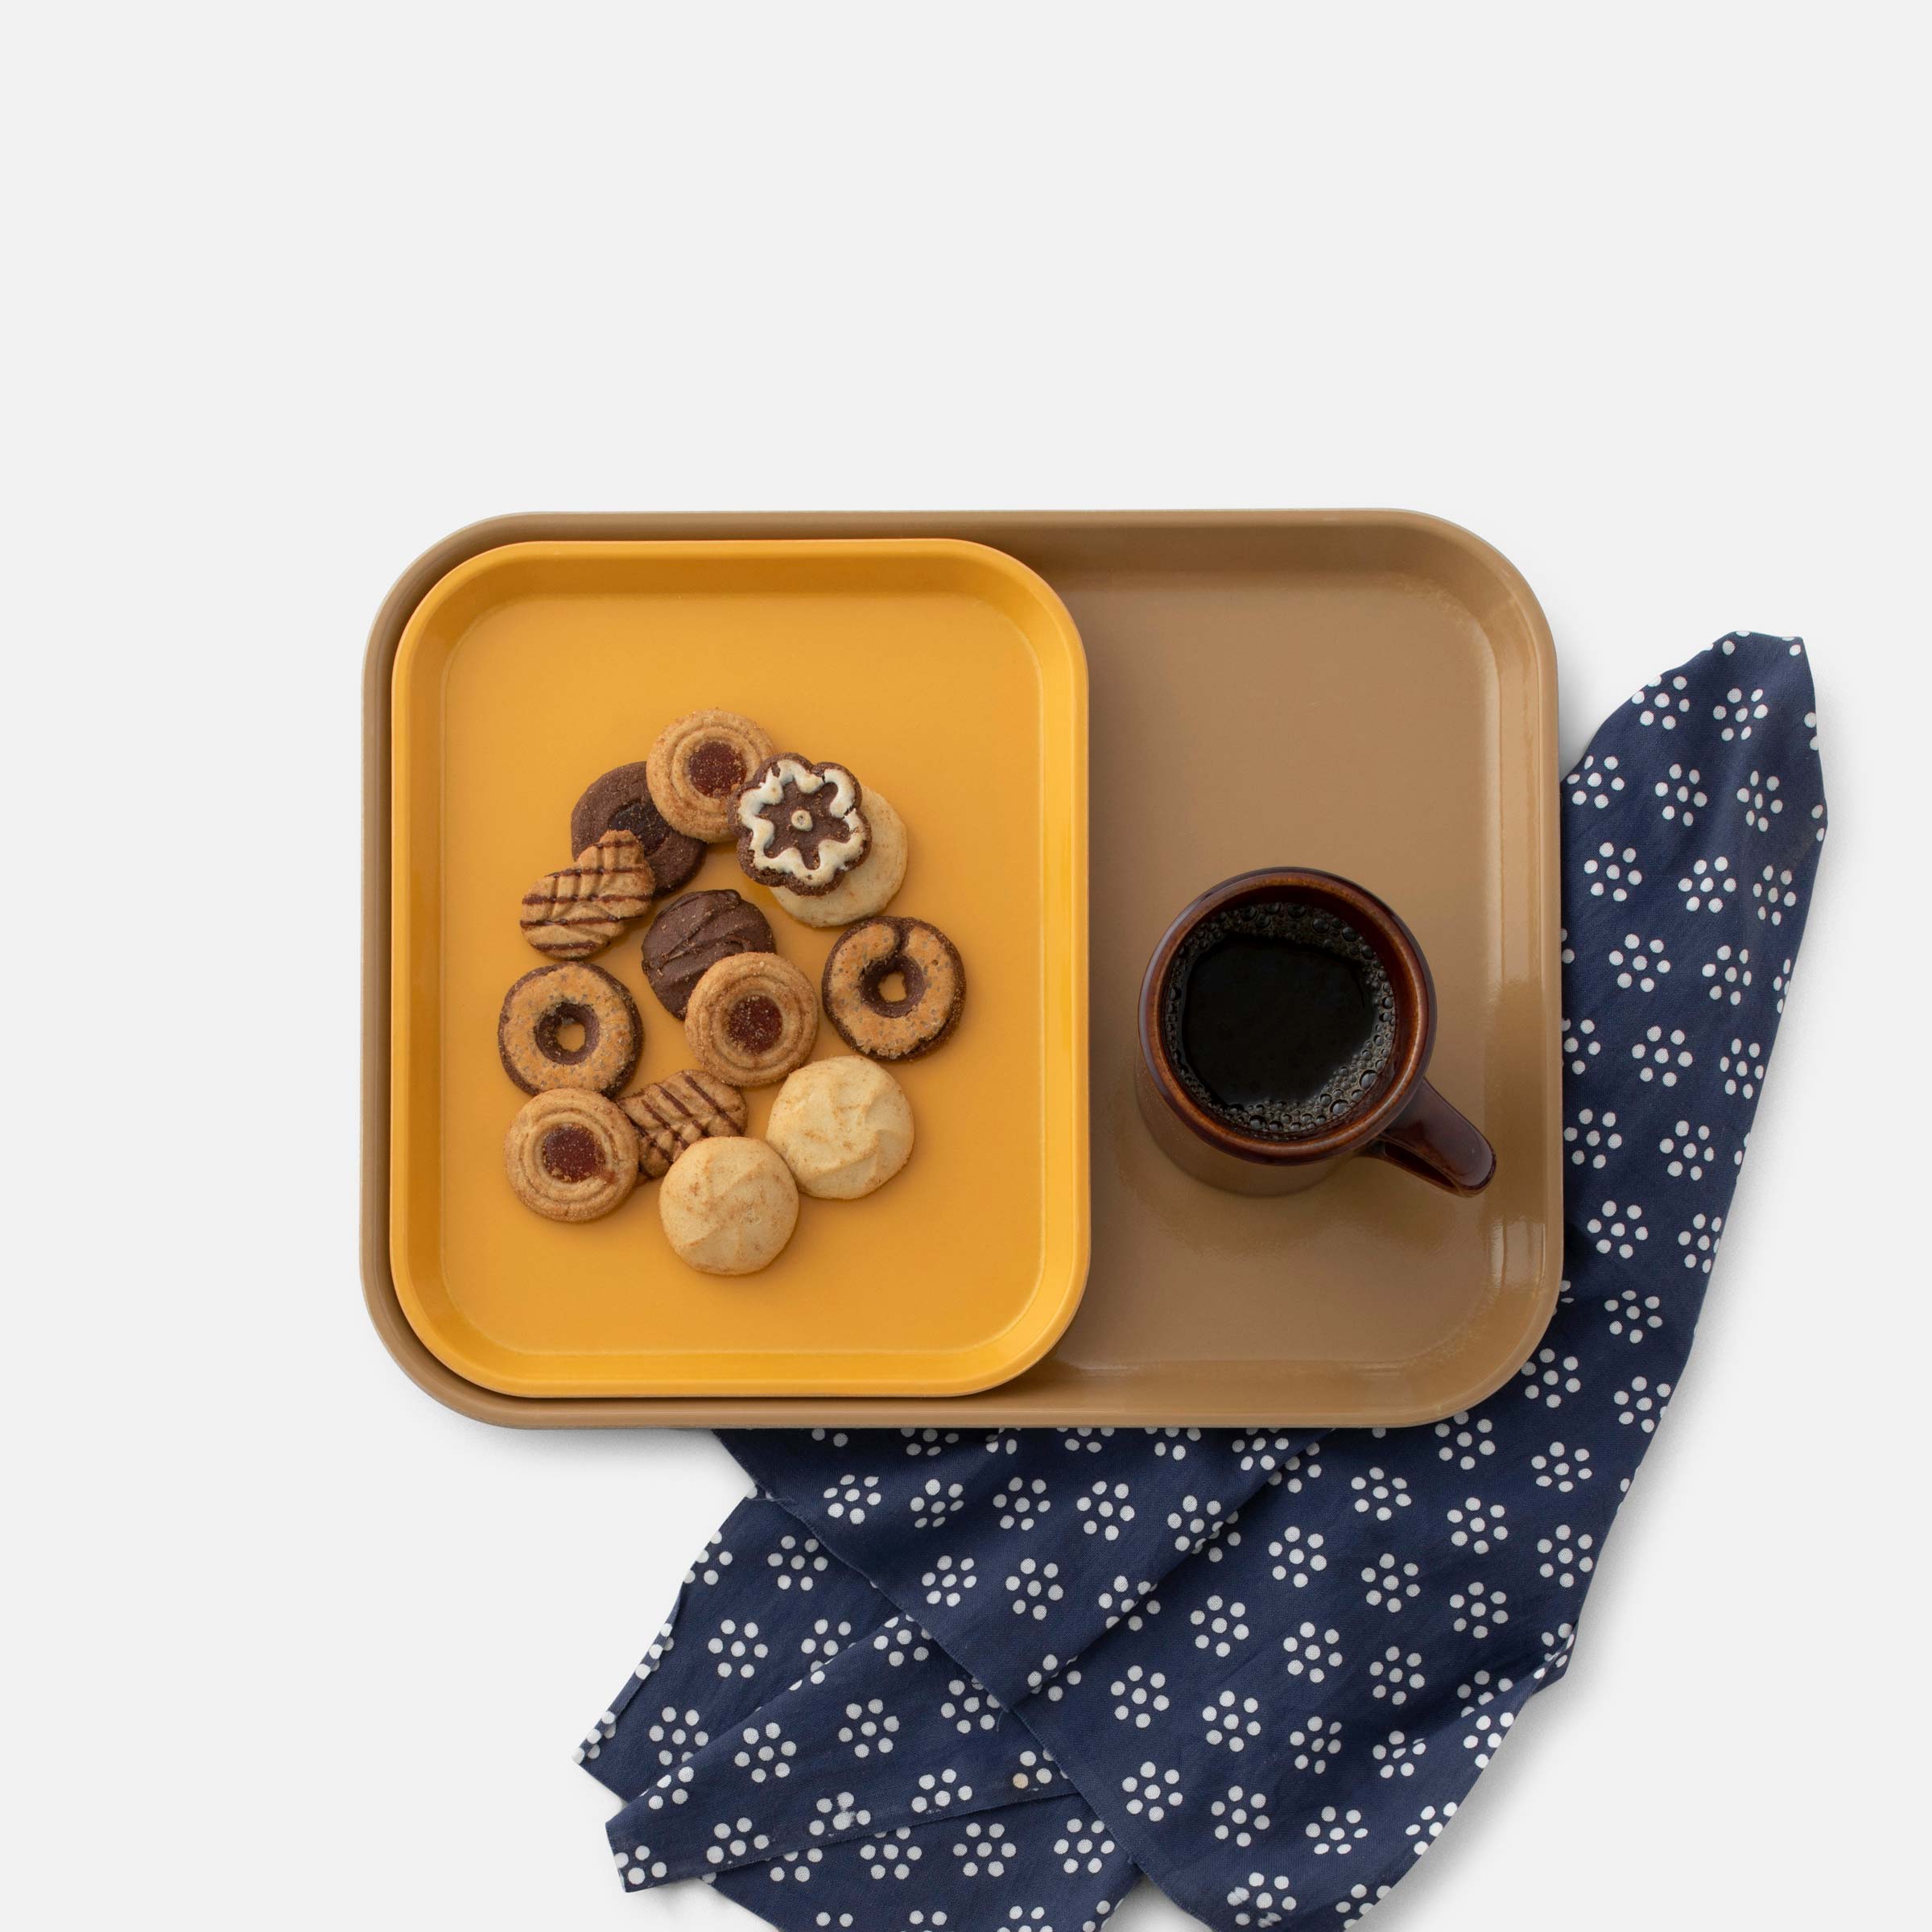 Everyday nesting tray with holiday cookies and a mug on top.